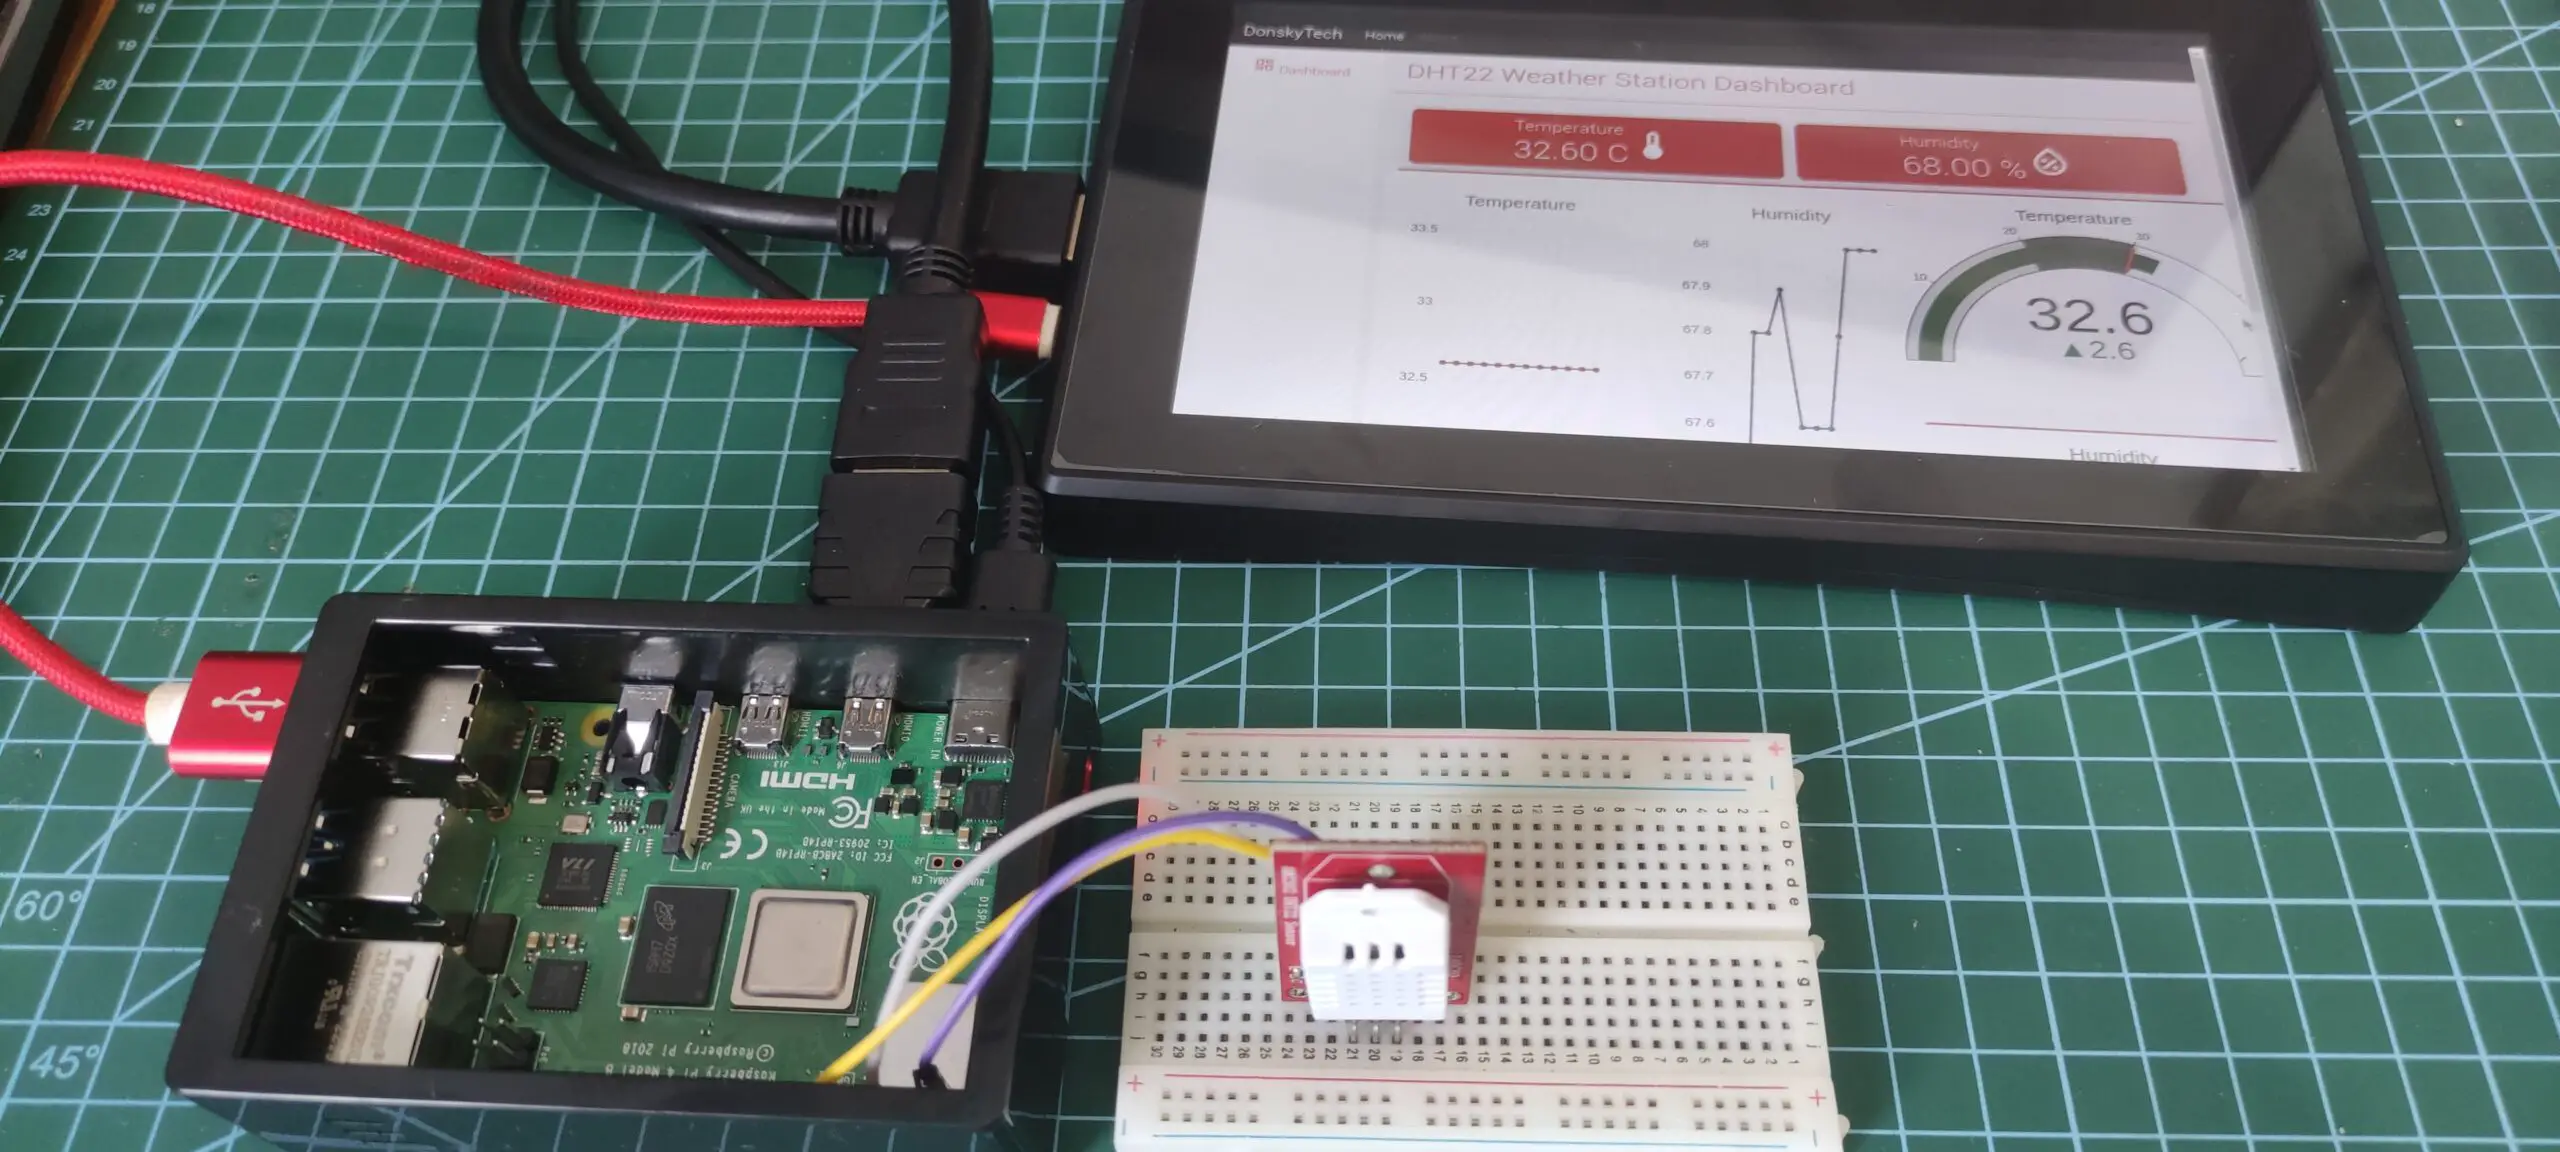 Raspberry Pi Temperature Monitoring with TouchScreen Display